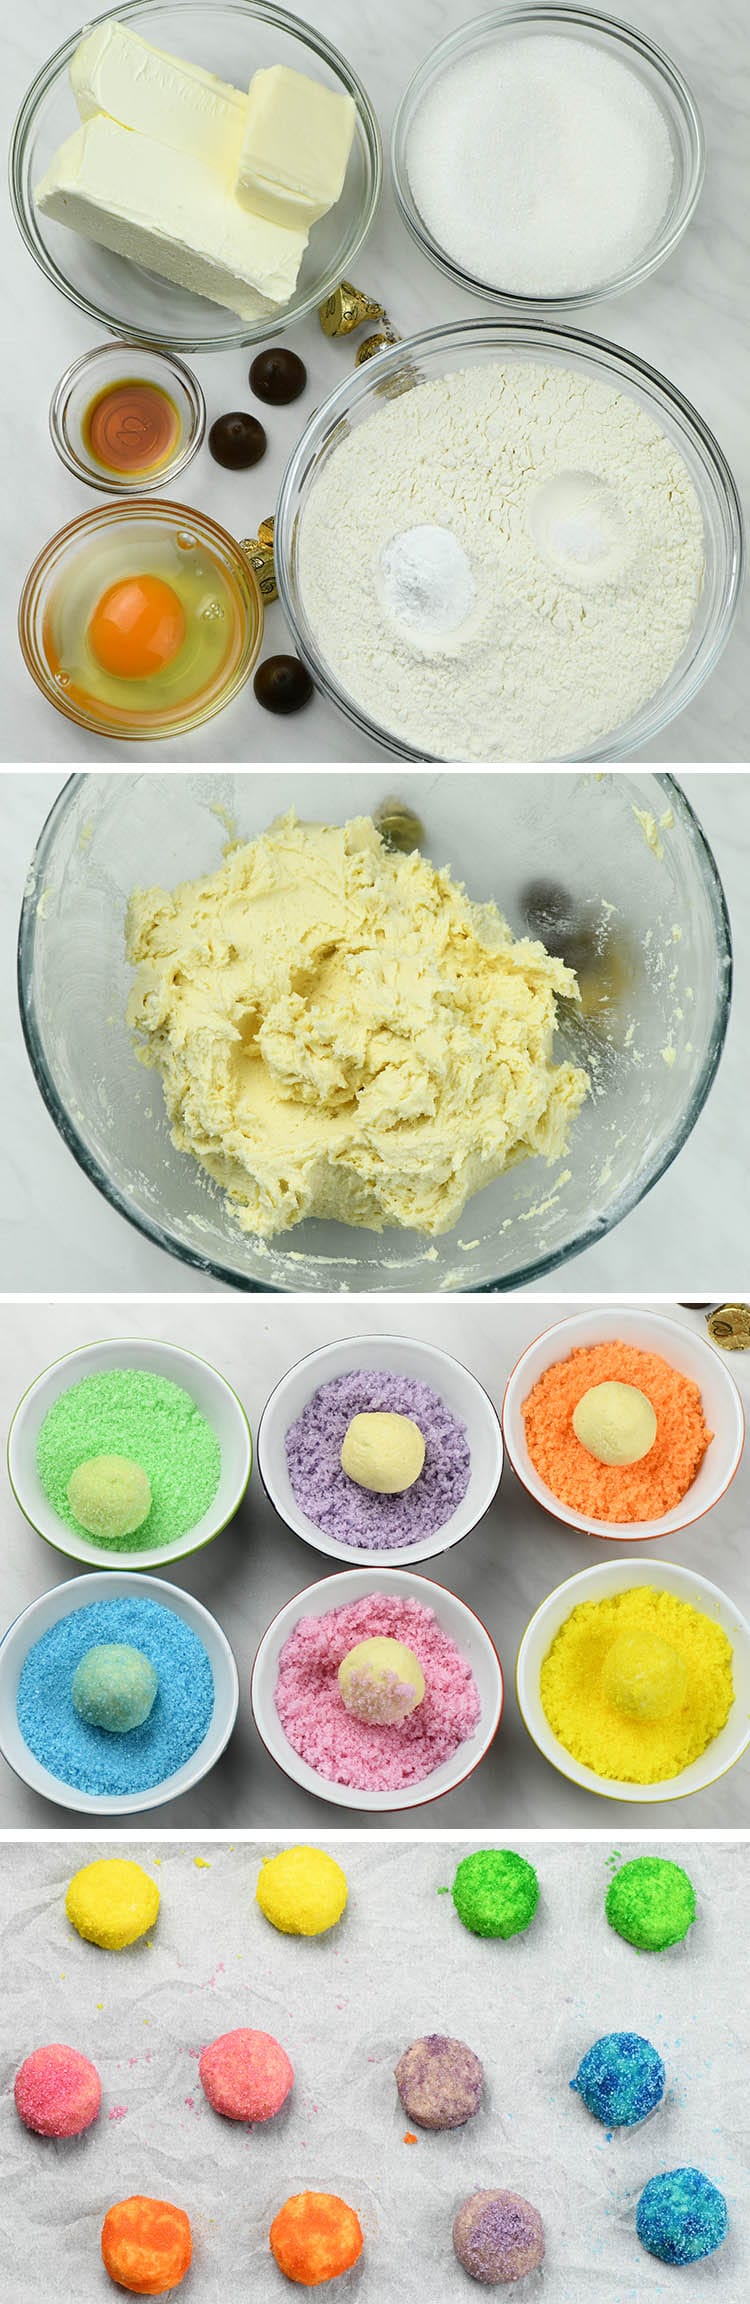 Four different images showing step by step cookies preparation.